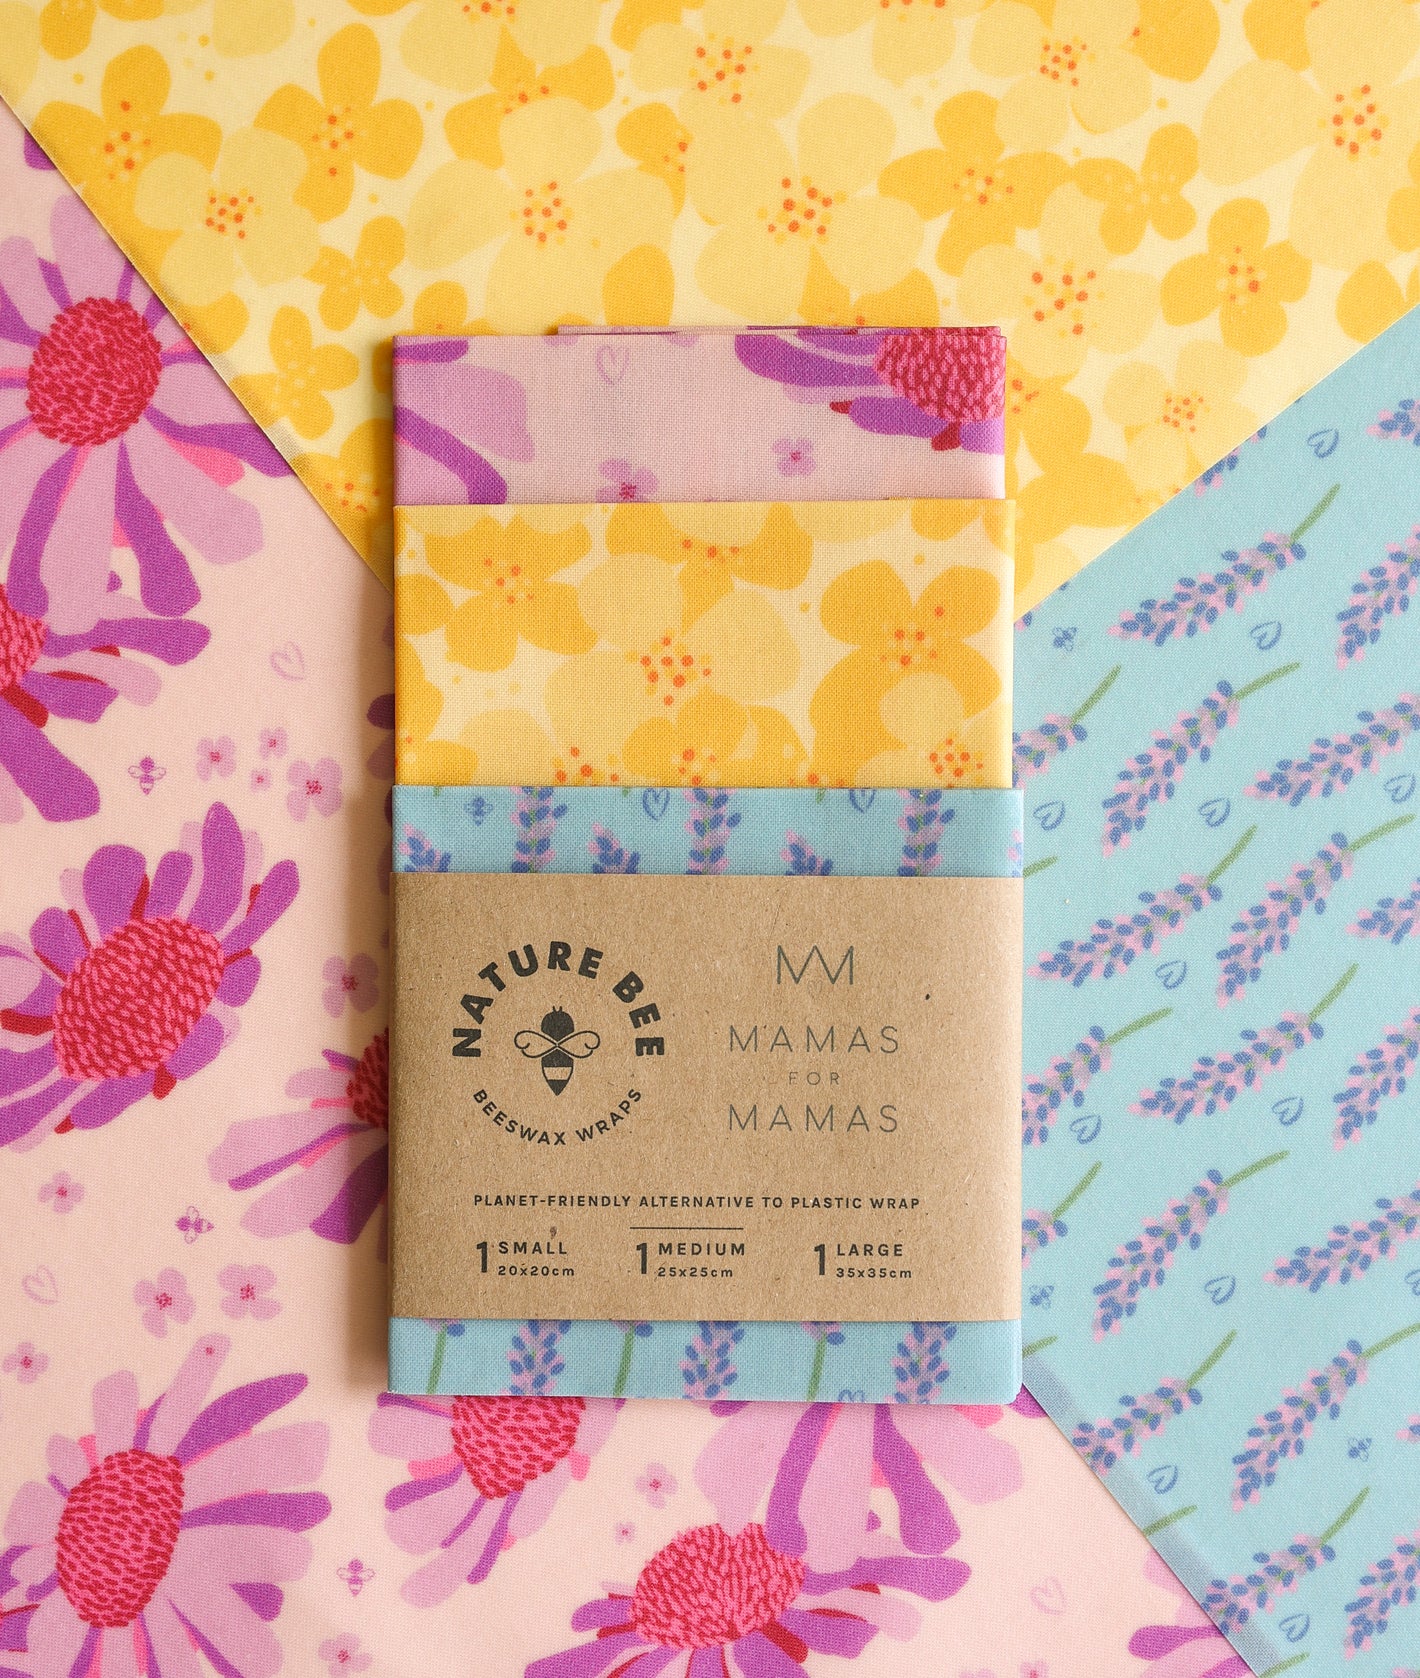 Mamas for Mamas collaborated on a limited edition beeswax wrap variety set made with Nature Bee. Proceeds donated to Mamas for Mamas.